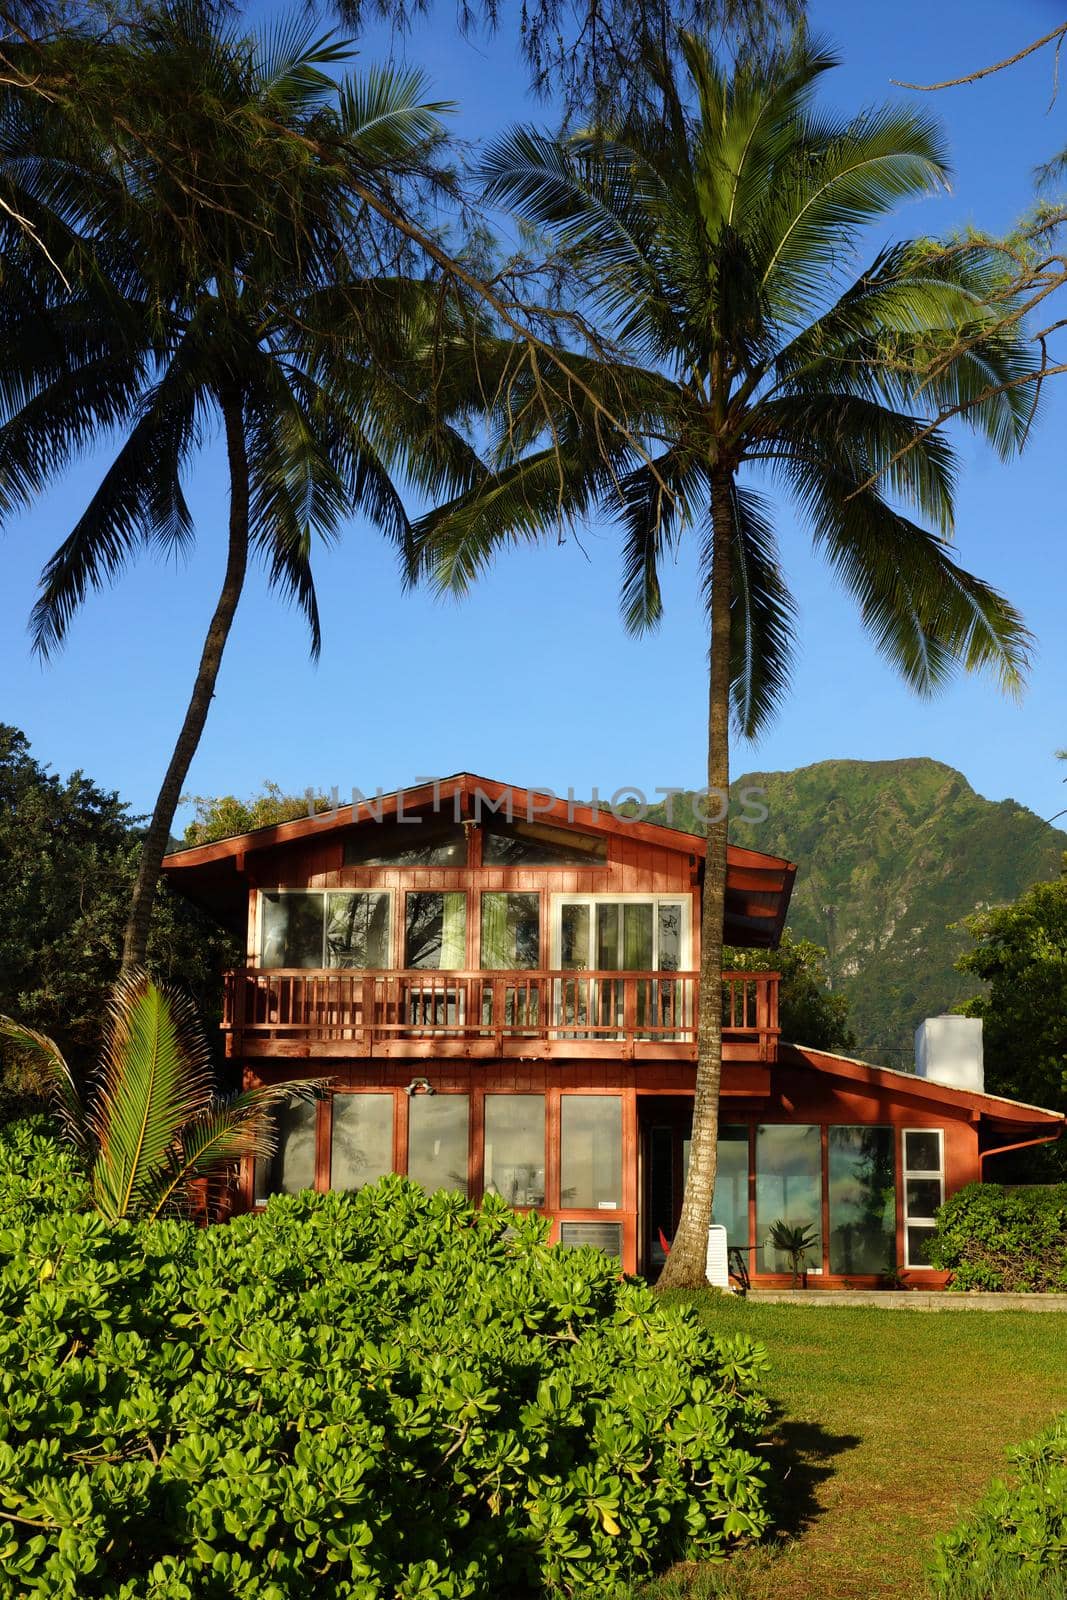 Red Beach House and coconut trees in Waimanalo on a Beautiful Day on Oahu, Hawaii.                               